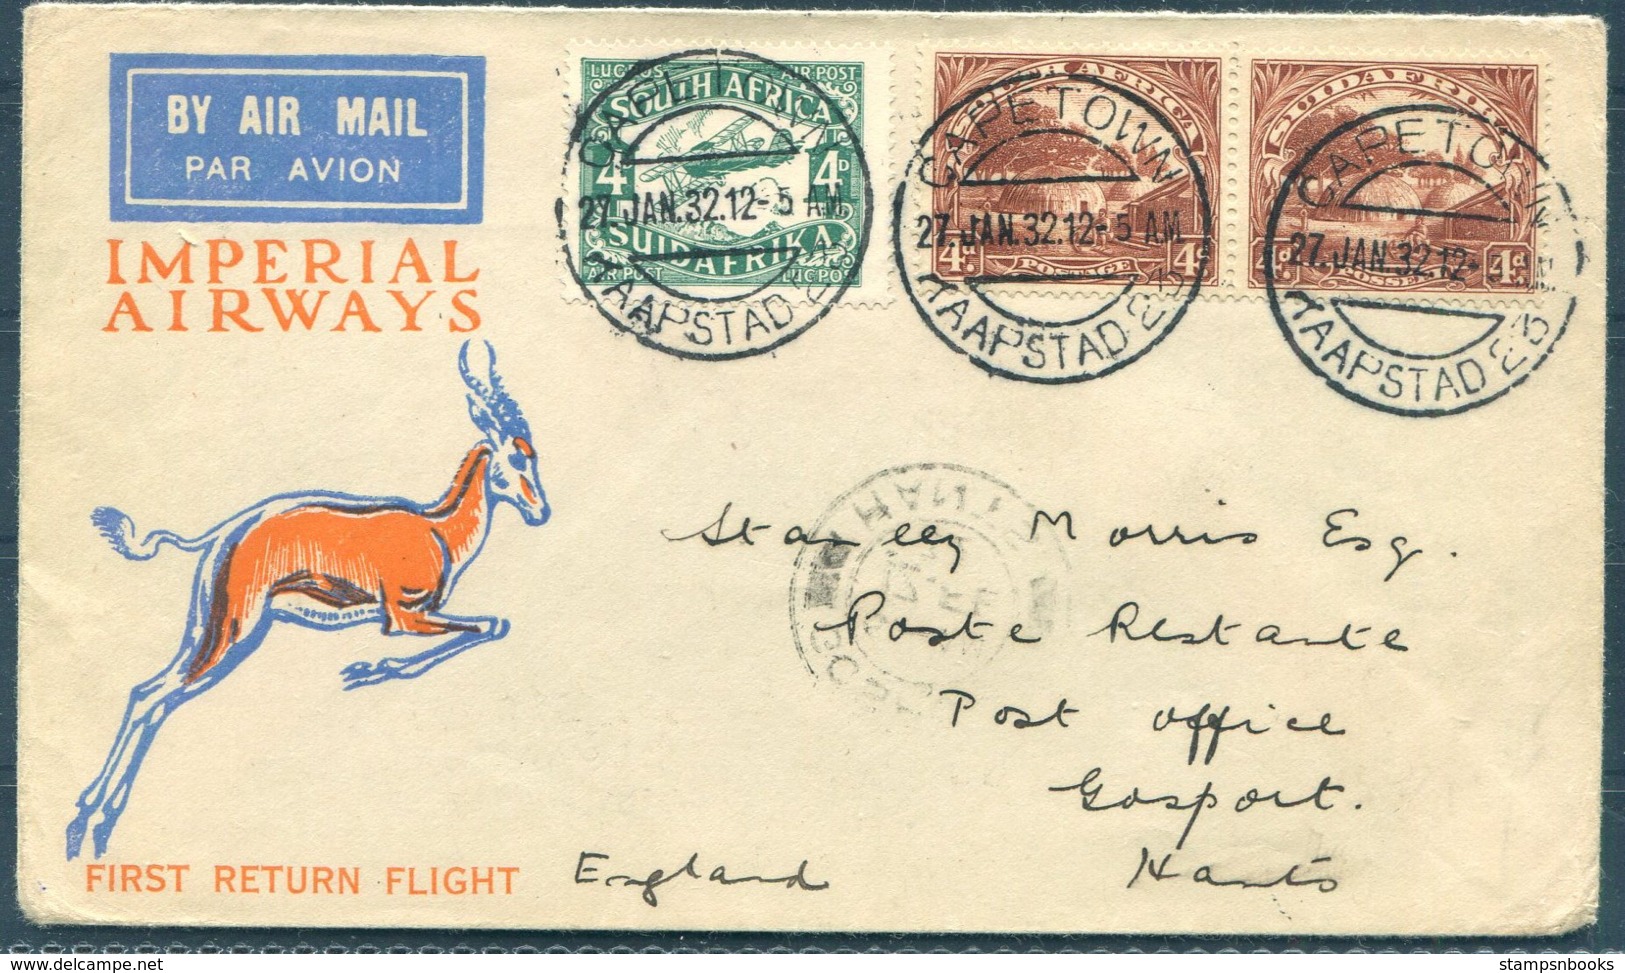 1932 South Africa, Imperial Airways, First Return Flight Airmail Cover Capetown - London  / Gosport - Airmail